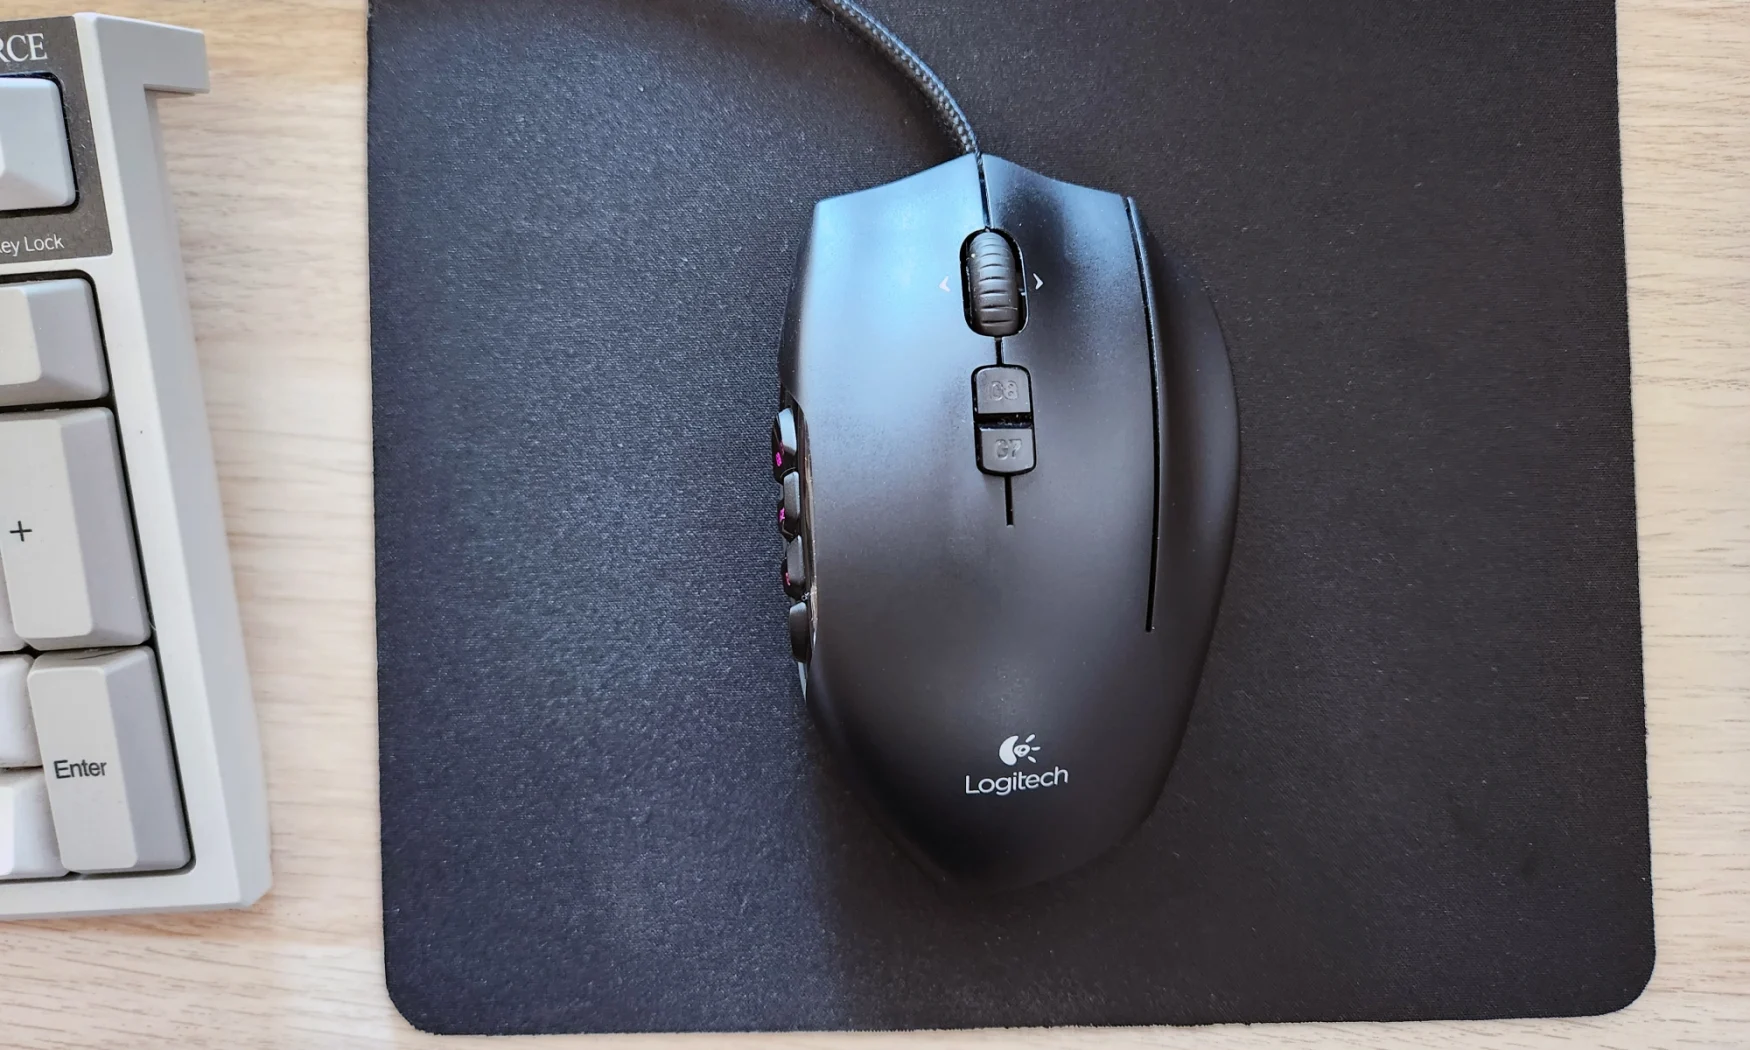 The Logitech G600 MMO gaming mouse rested on top of a black mouse pad on a desk.